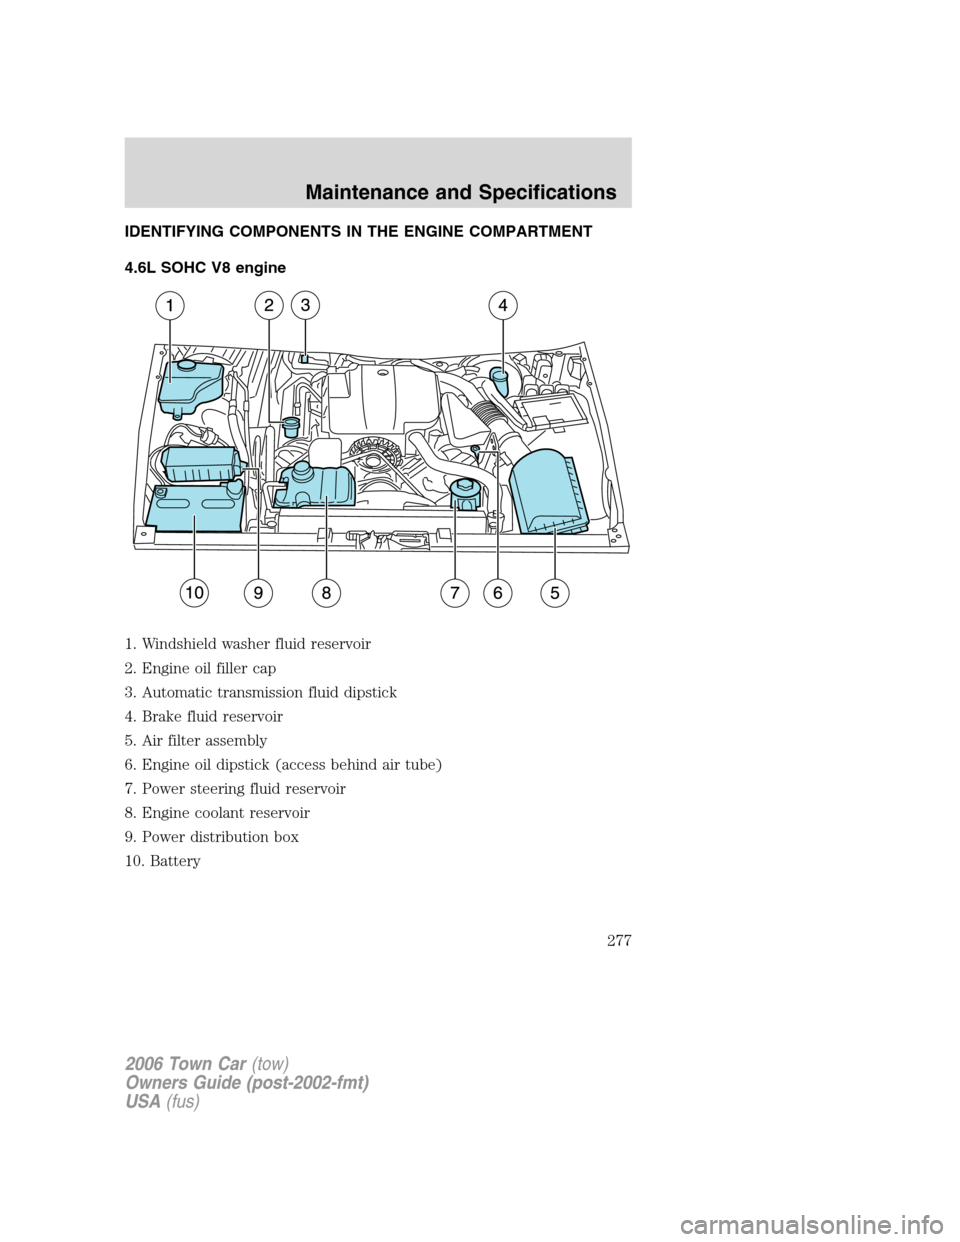 LINCOLN TOWN CAR 2006  Owners Manual IDENTIFYING COMPONENTS IN THE ENGINE COMPARTMENT
4.6L SOHC V8 engine
1. Windshield washer fluid reservoir
2. Engine oil filler cap
3. Automatic transmission fluid dipstick
4. Brake fluid reservoir
5. 